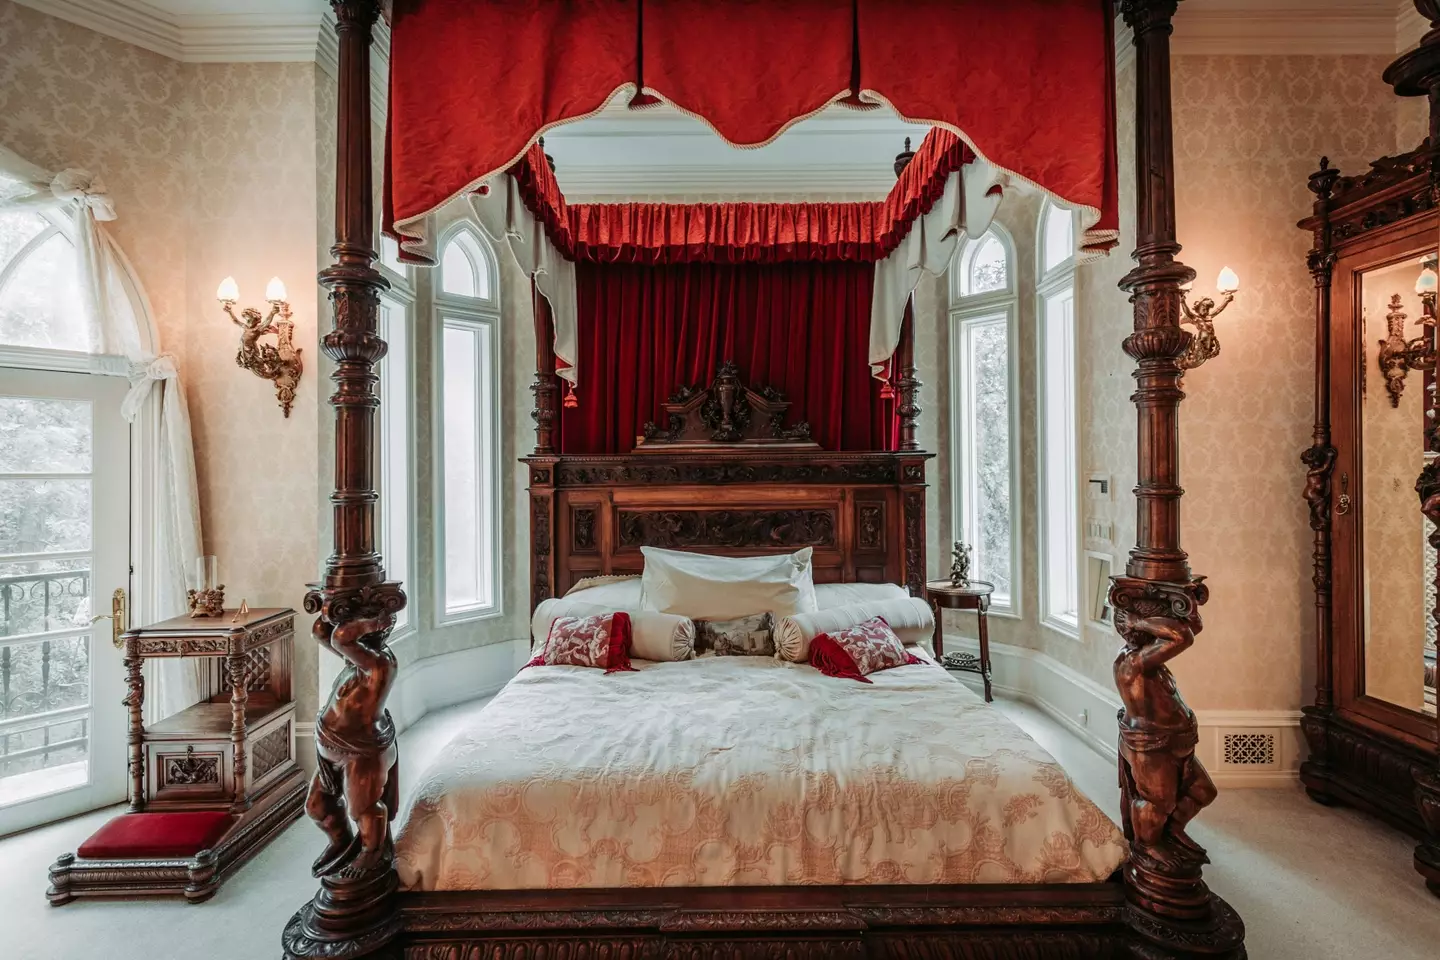 The master bedroom includes a four-poster bed and a balcony (